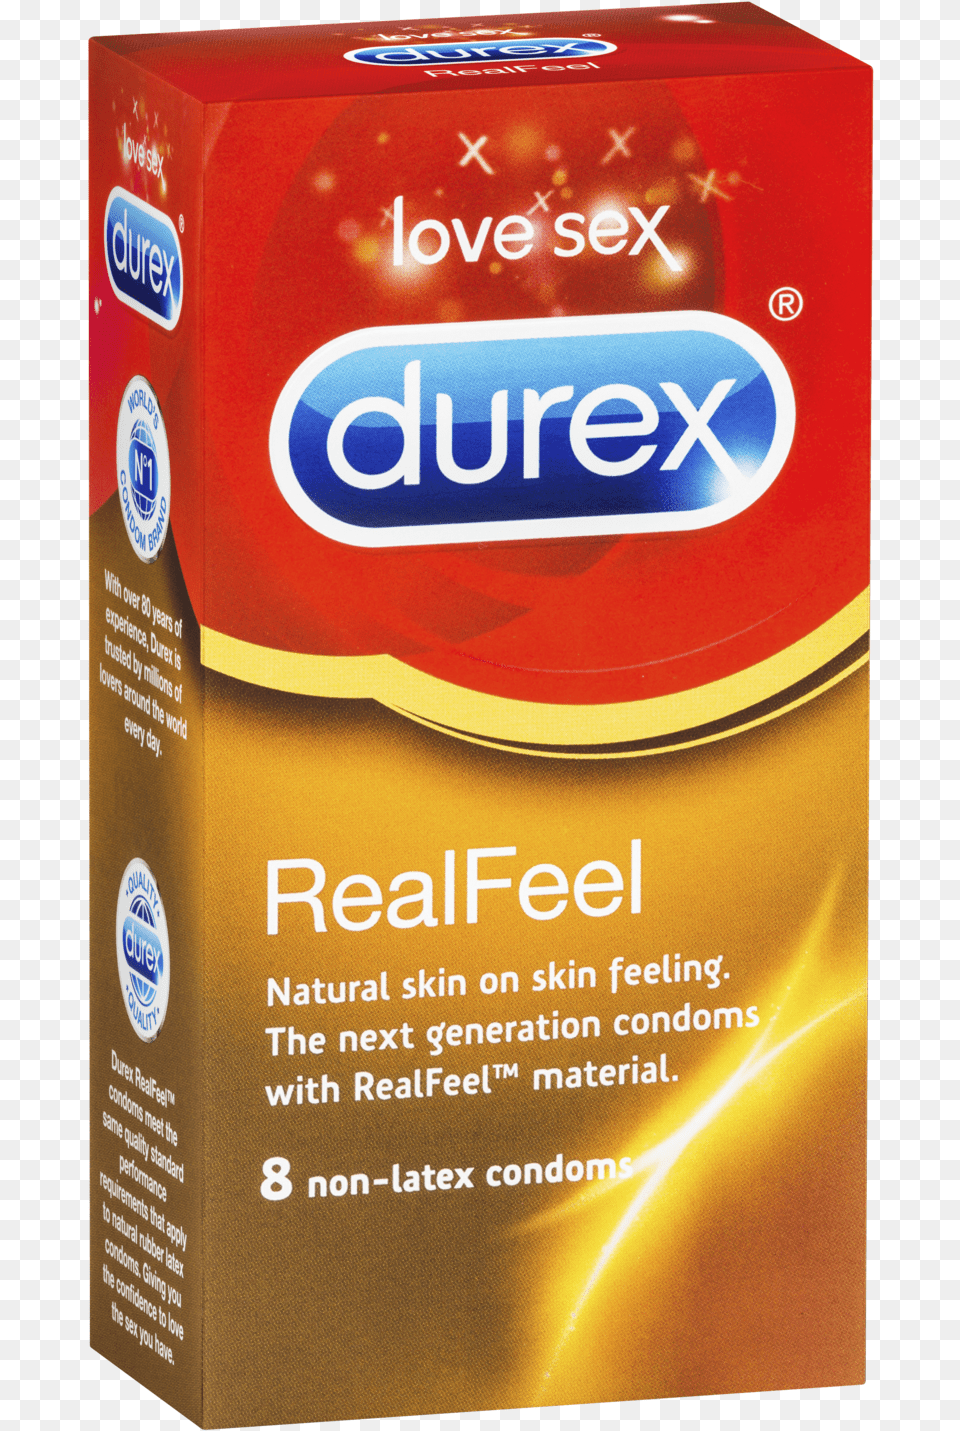 Durex Real Feel Condoms Condom Real Feel, Can, Tin, Box Png Image